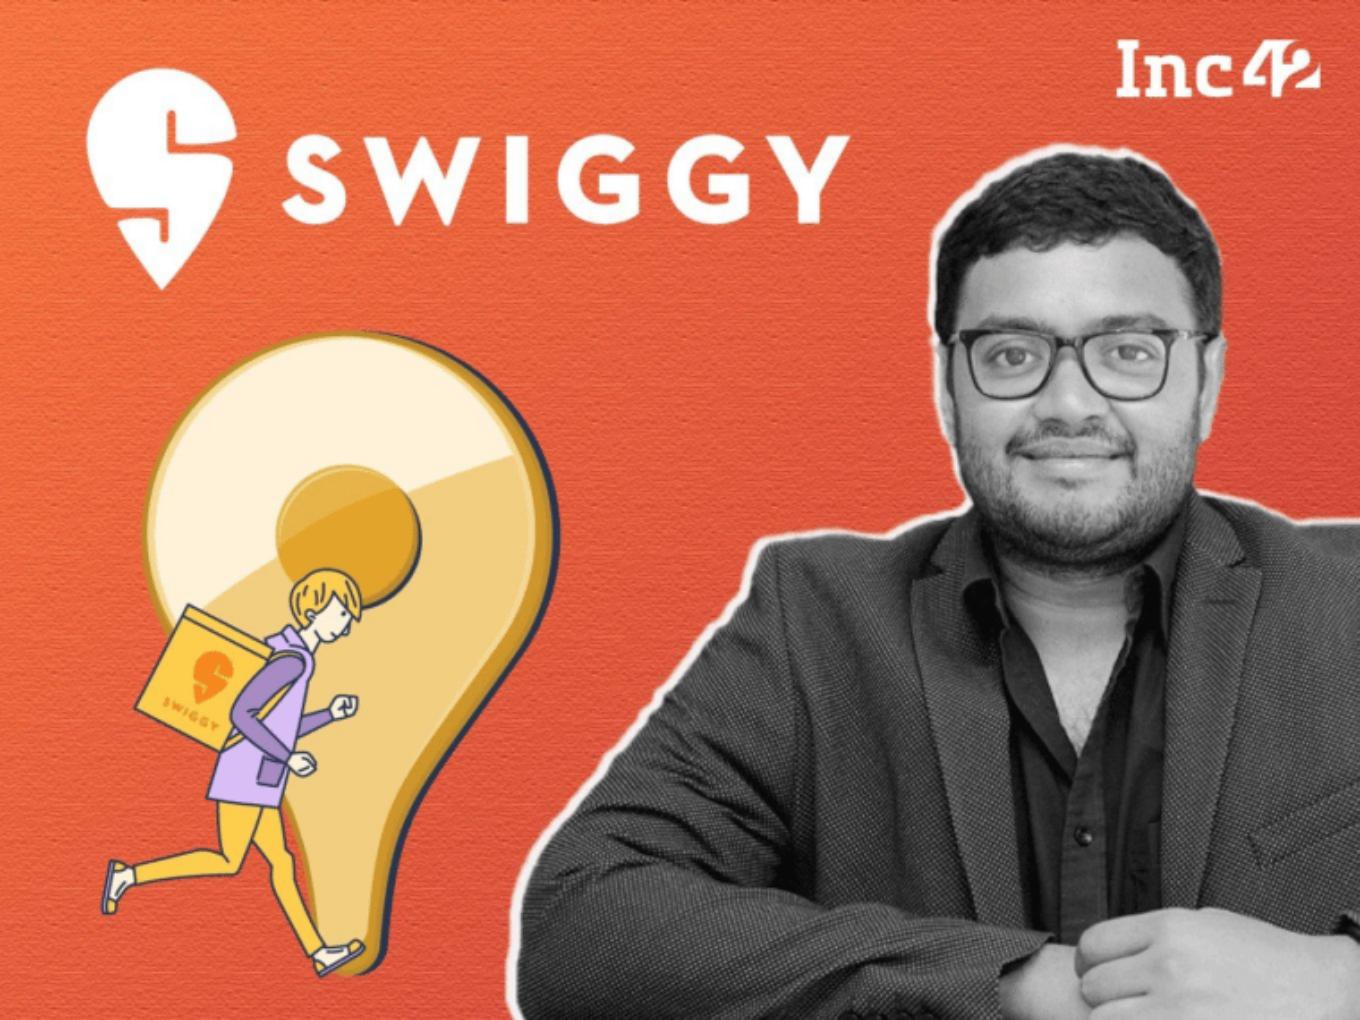 Flipkart Held Talks With Swiggy For Stake Purchase, Says Report; IPO-Bound Startup Denies